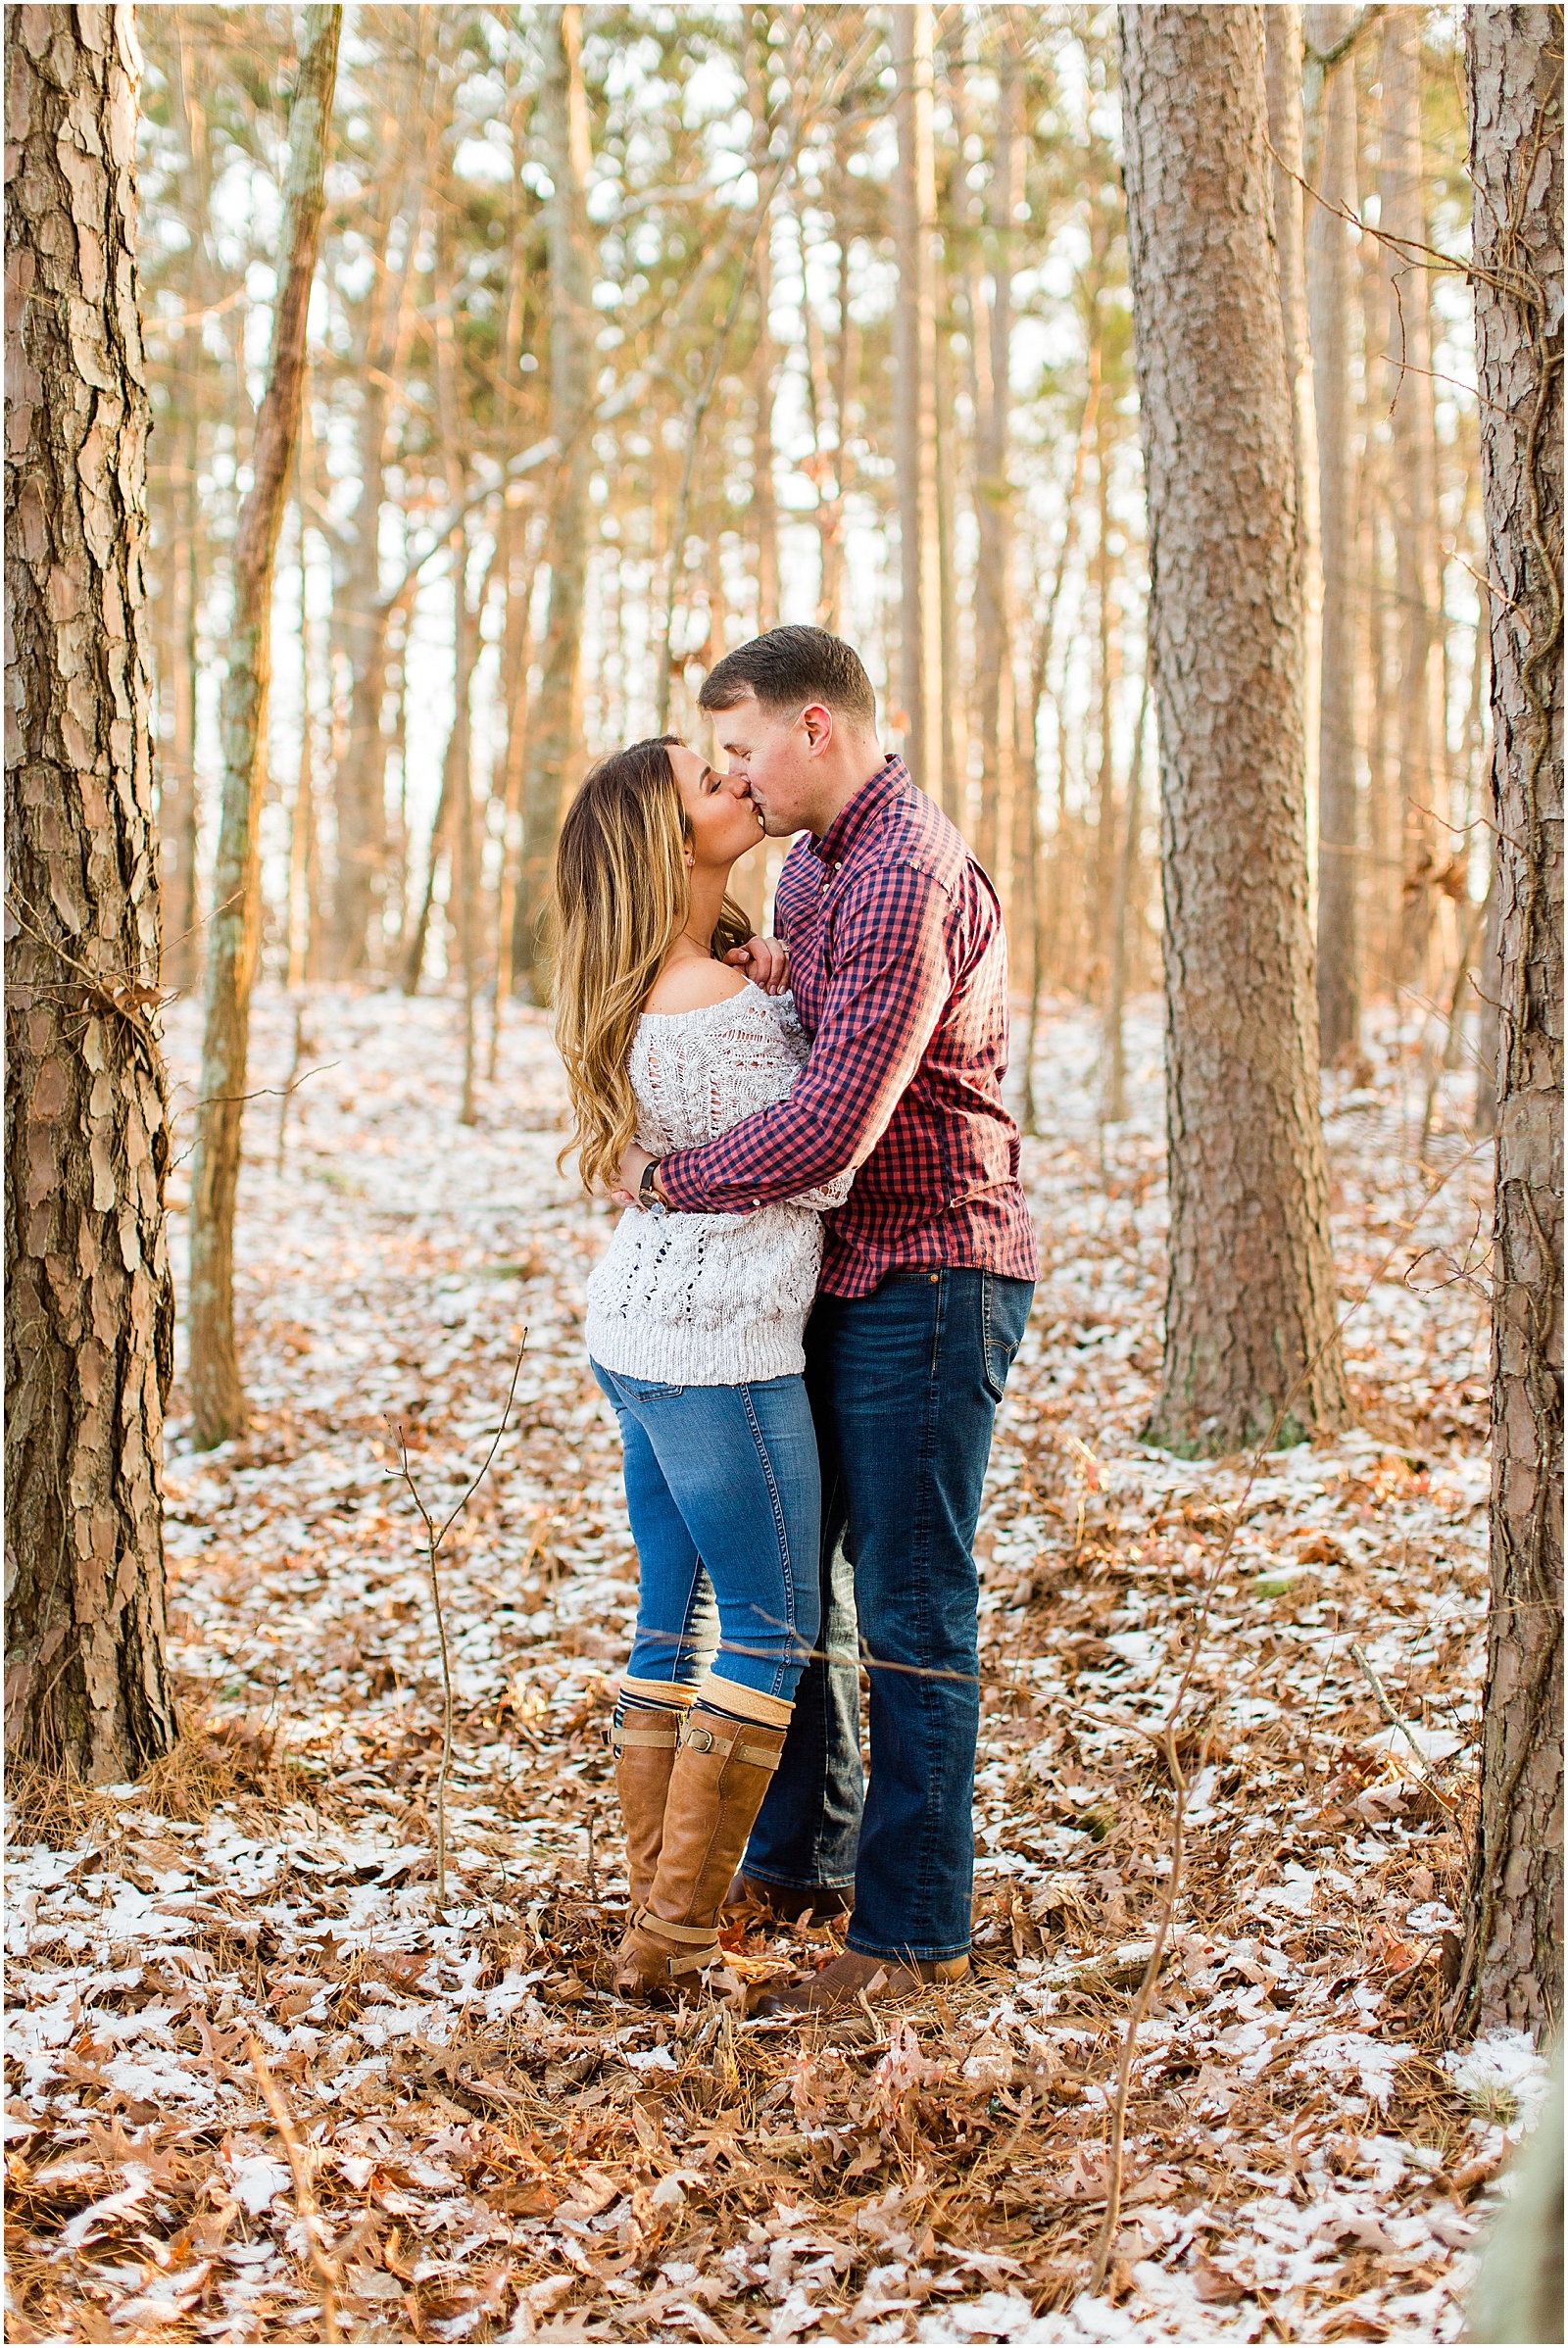 A Sunny Garden of the Gods Engagement Session | Shiloh and Lee | Bret and Brandie Photography035.jpg